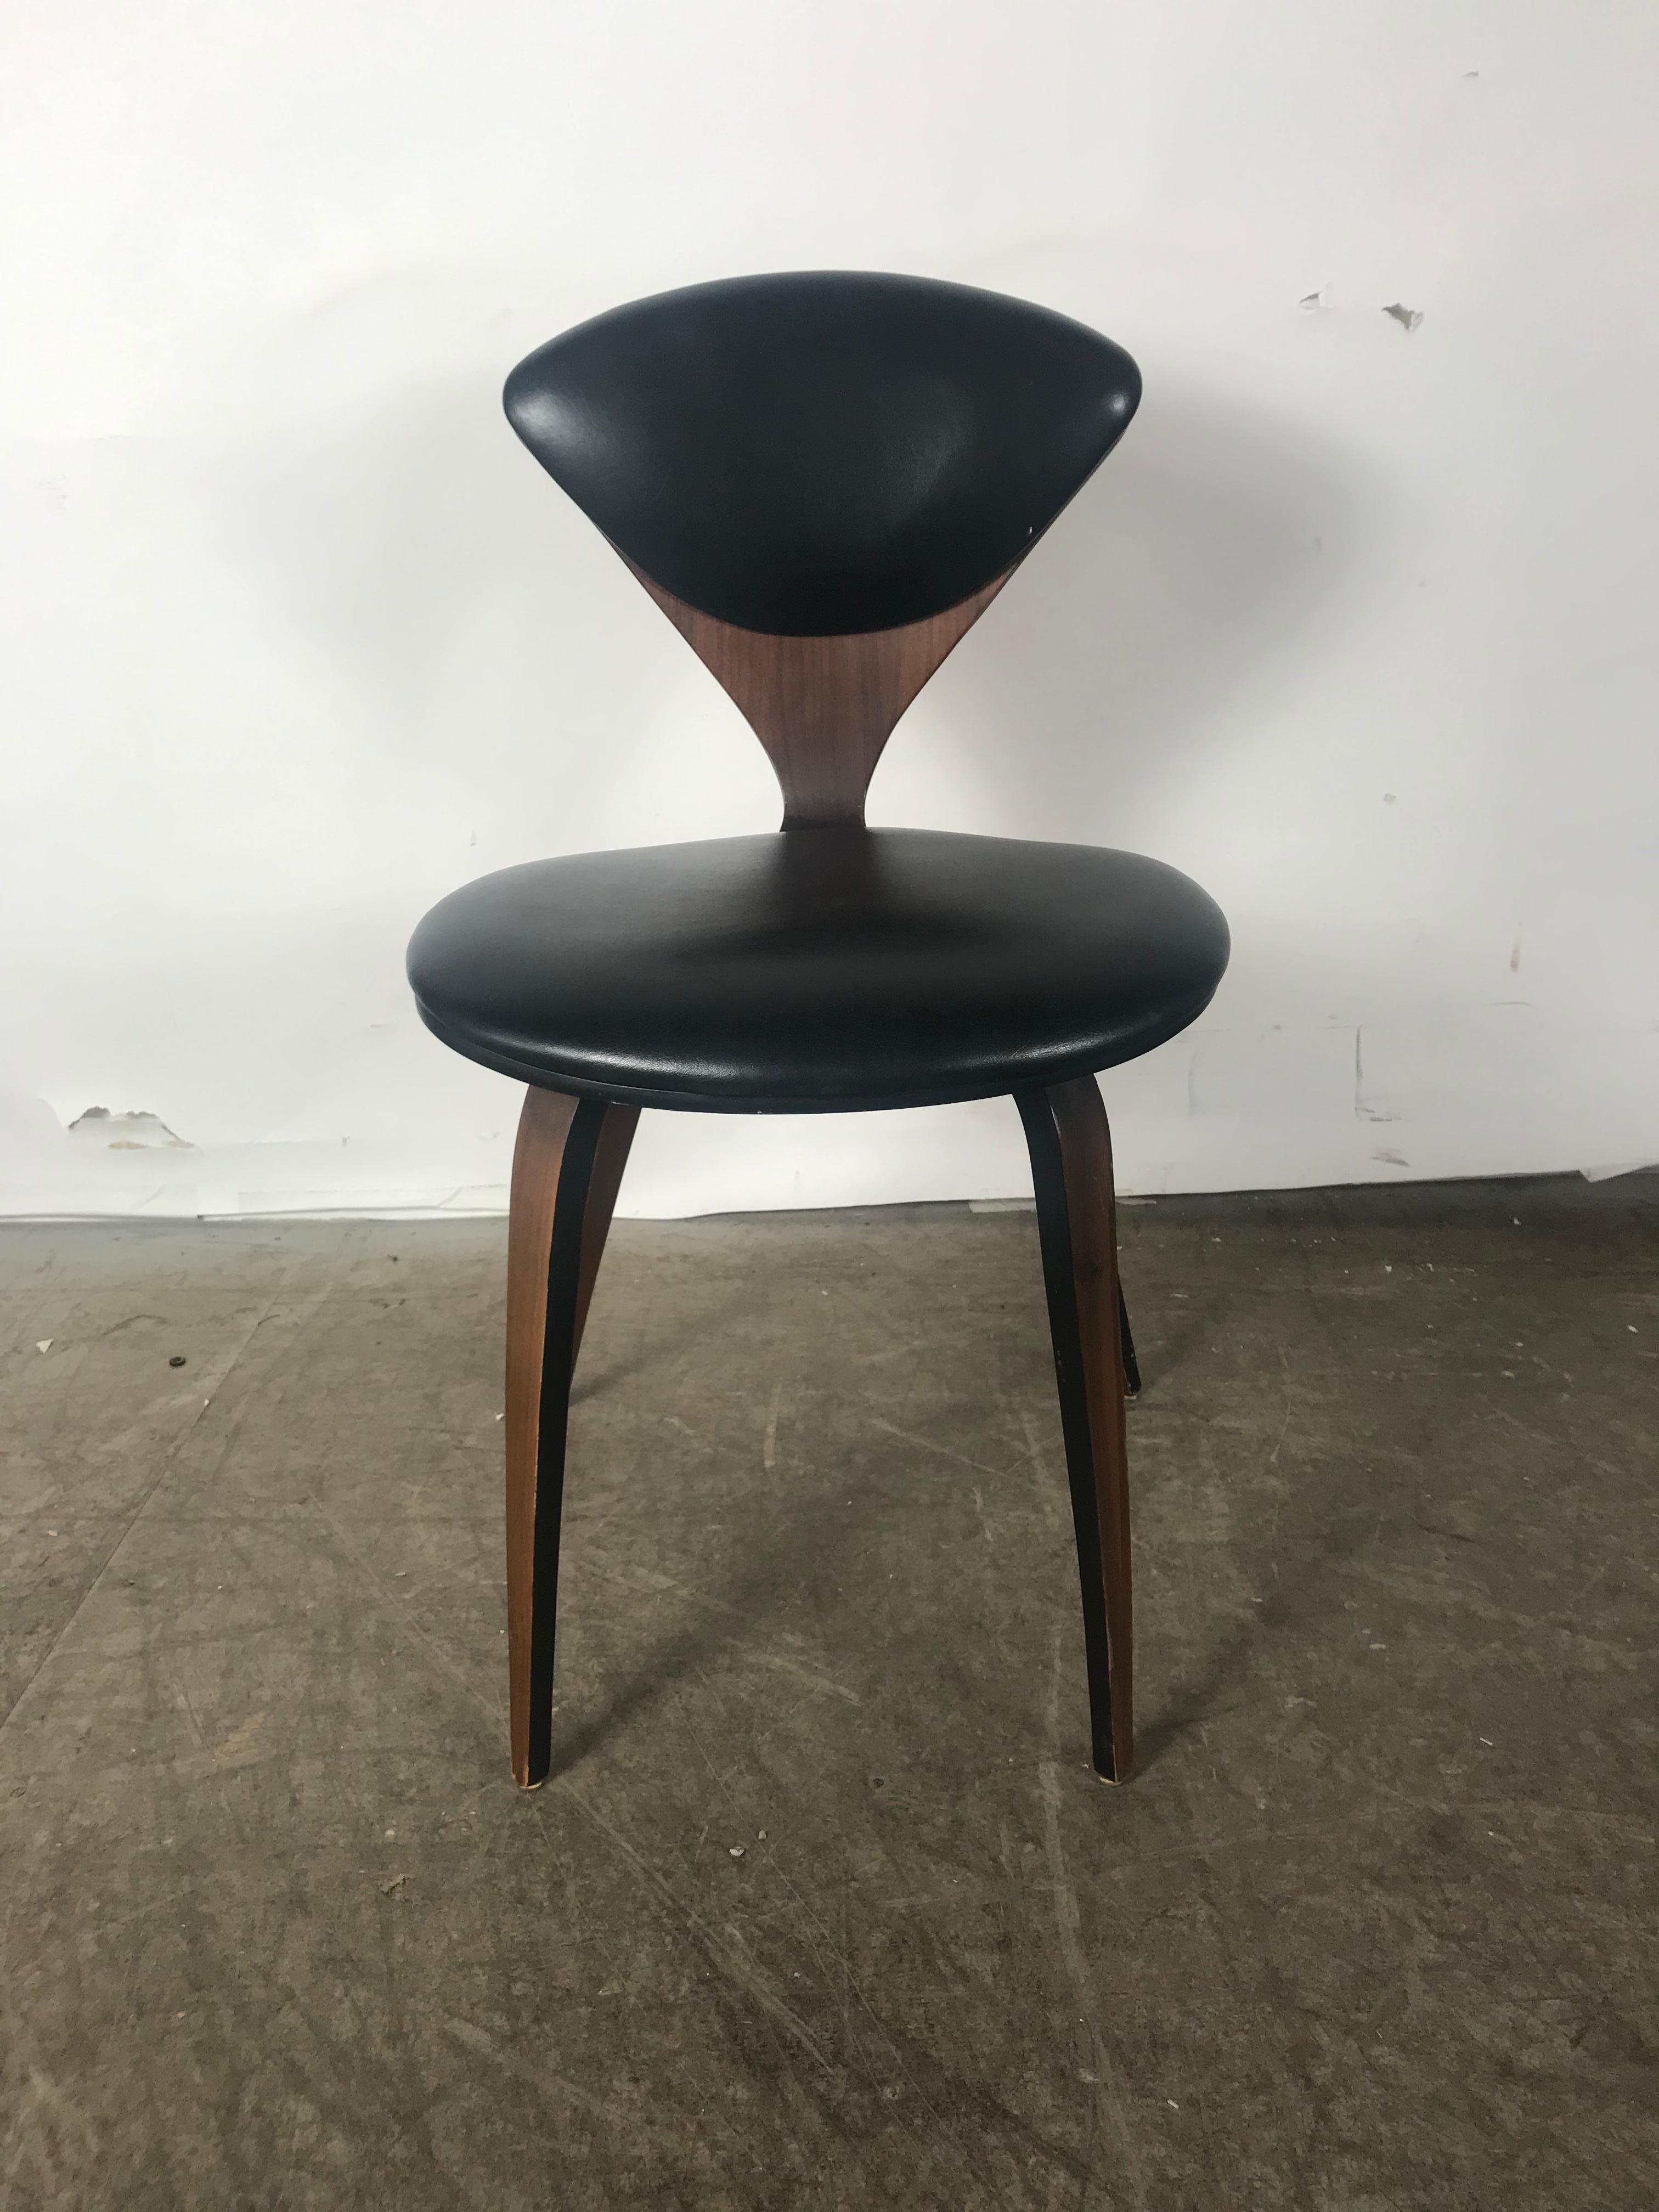 Classic Mid-Century Modern plywood desk / side chair designed by Norman Cherner manufactured by Plycraft, excellent original condition, stunning walnut wood graining. Retains original black Naugahyde seat and back, wonderful patina, extremely